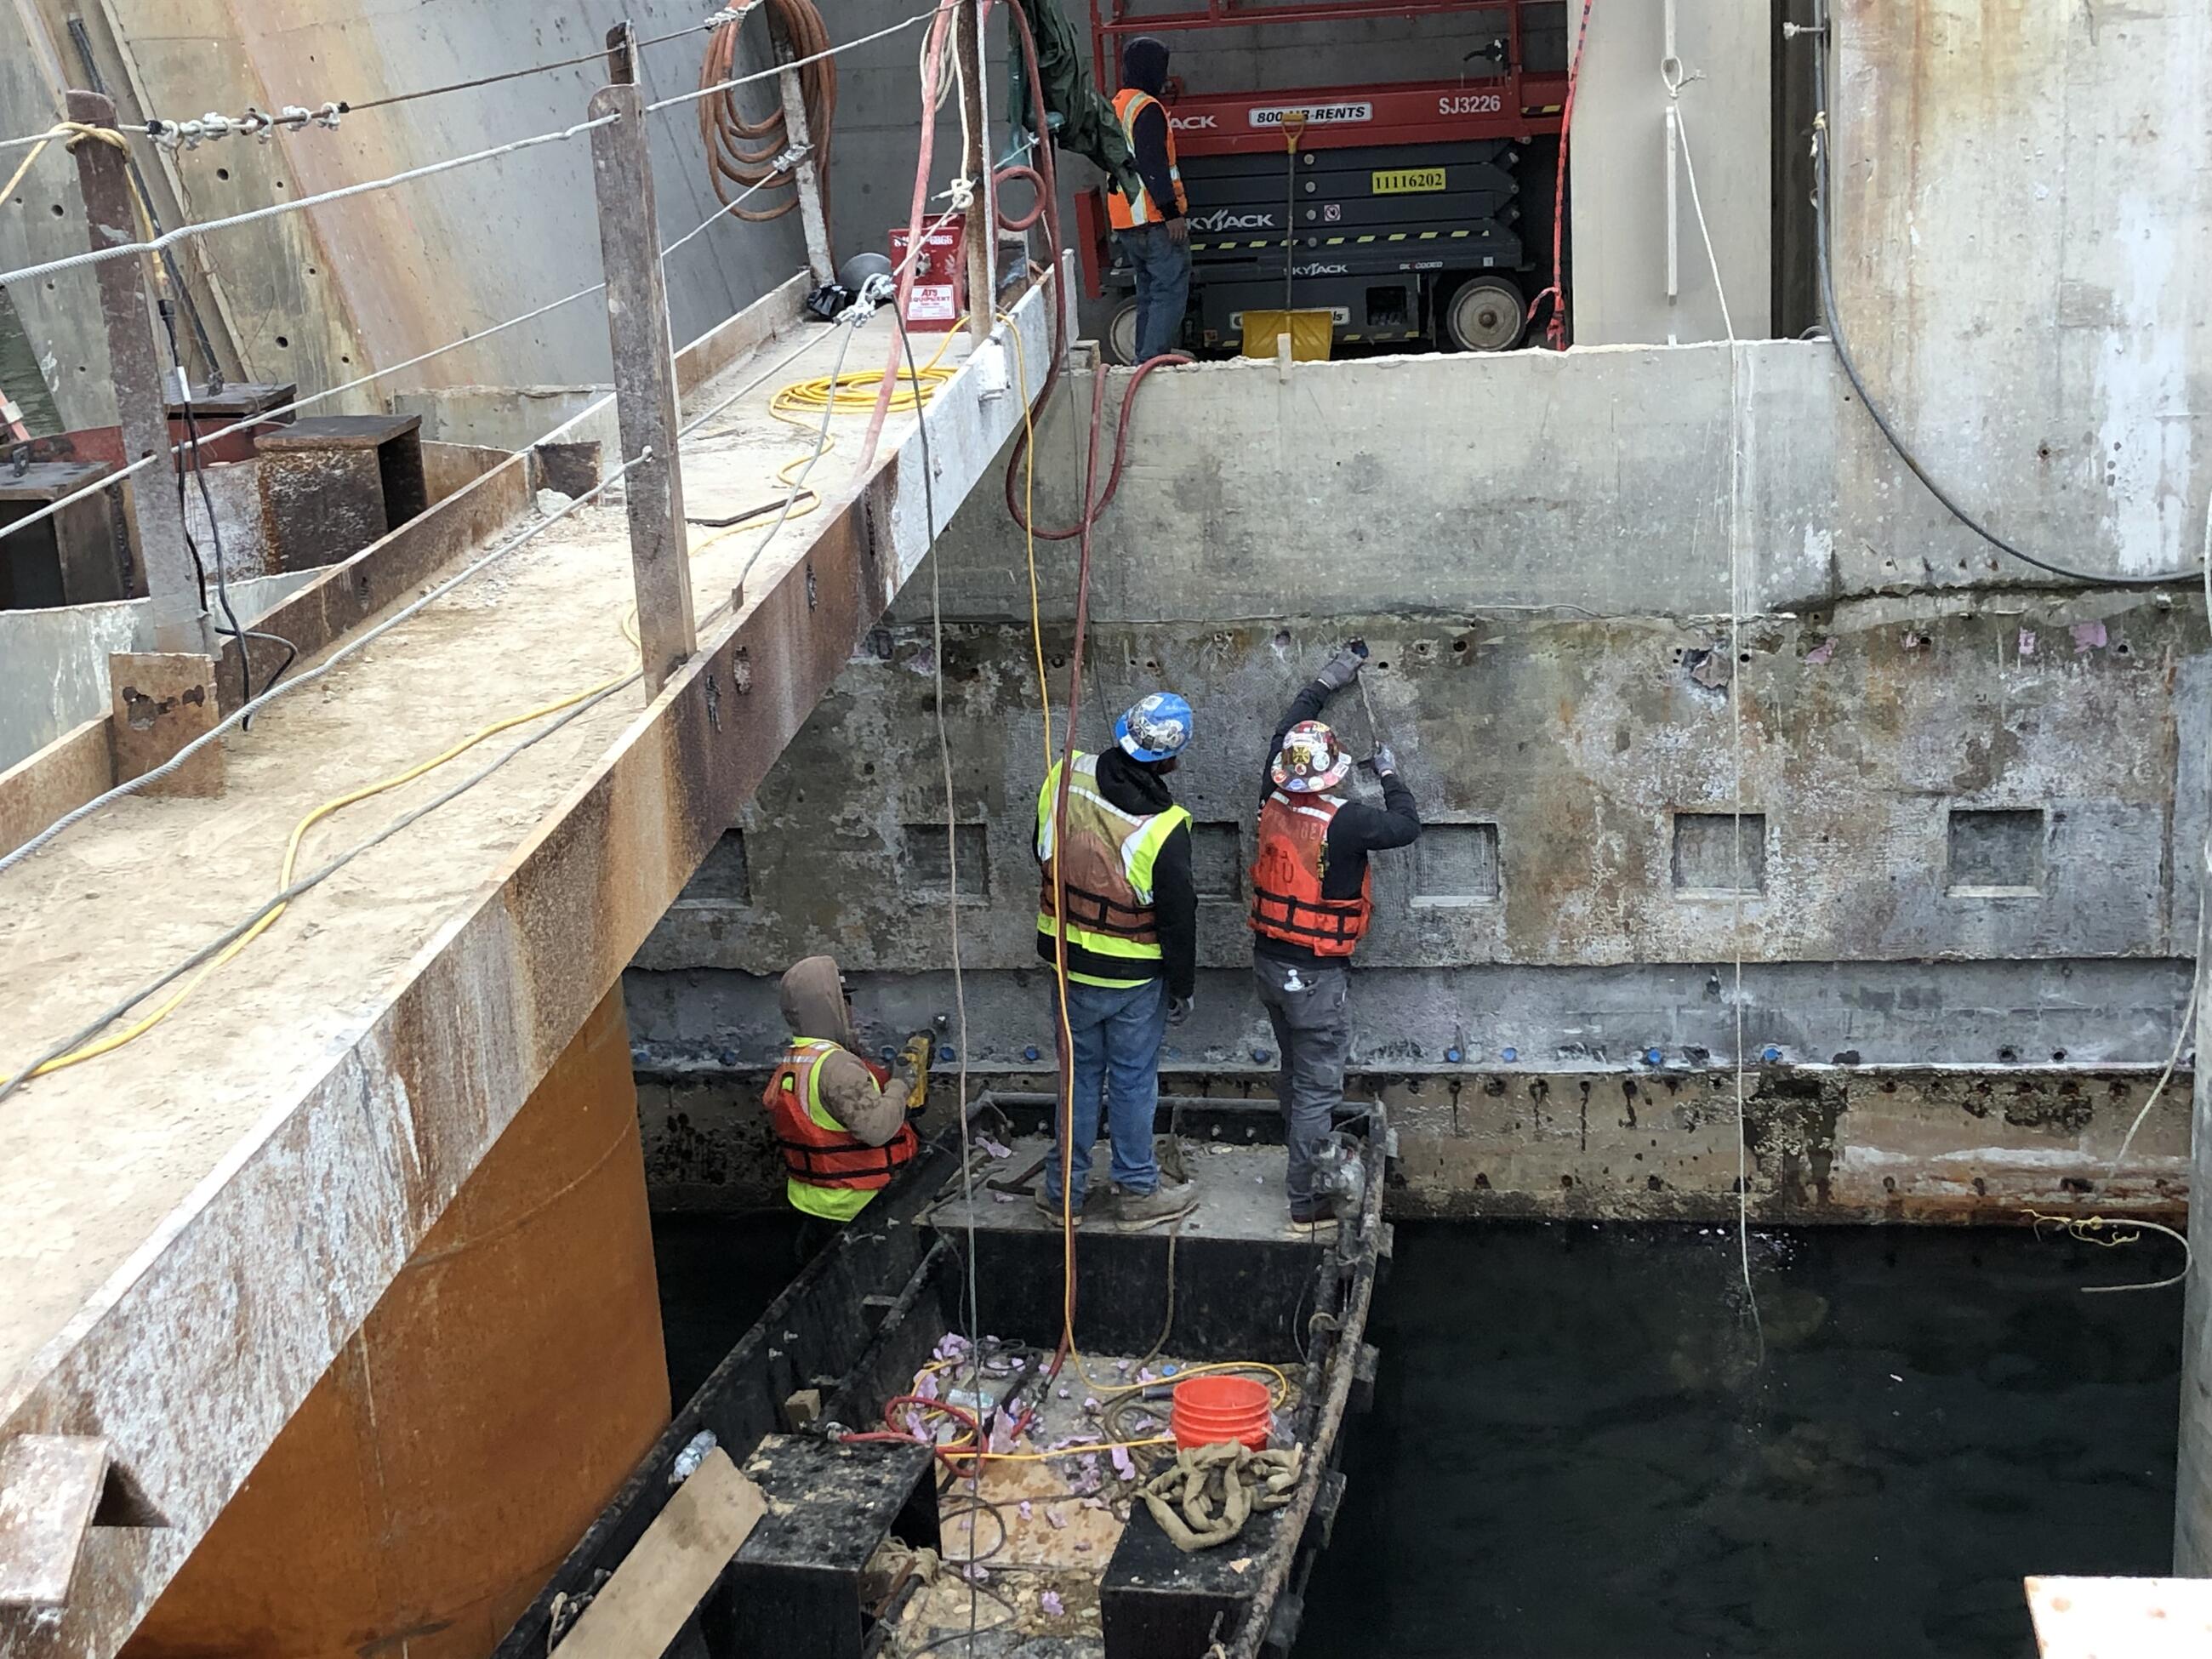 Three workers in safety vests stand on a small wooden boat on the water next to the bridge. They are cleaning the formwork from the bridge's south footing.